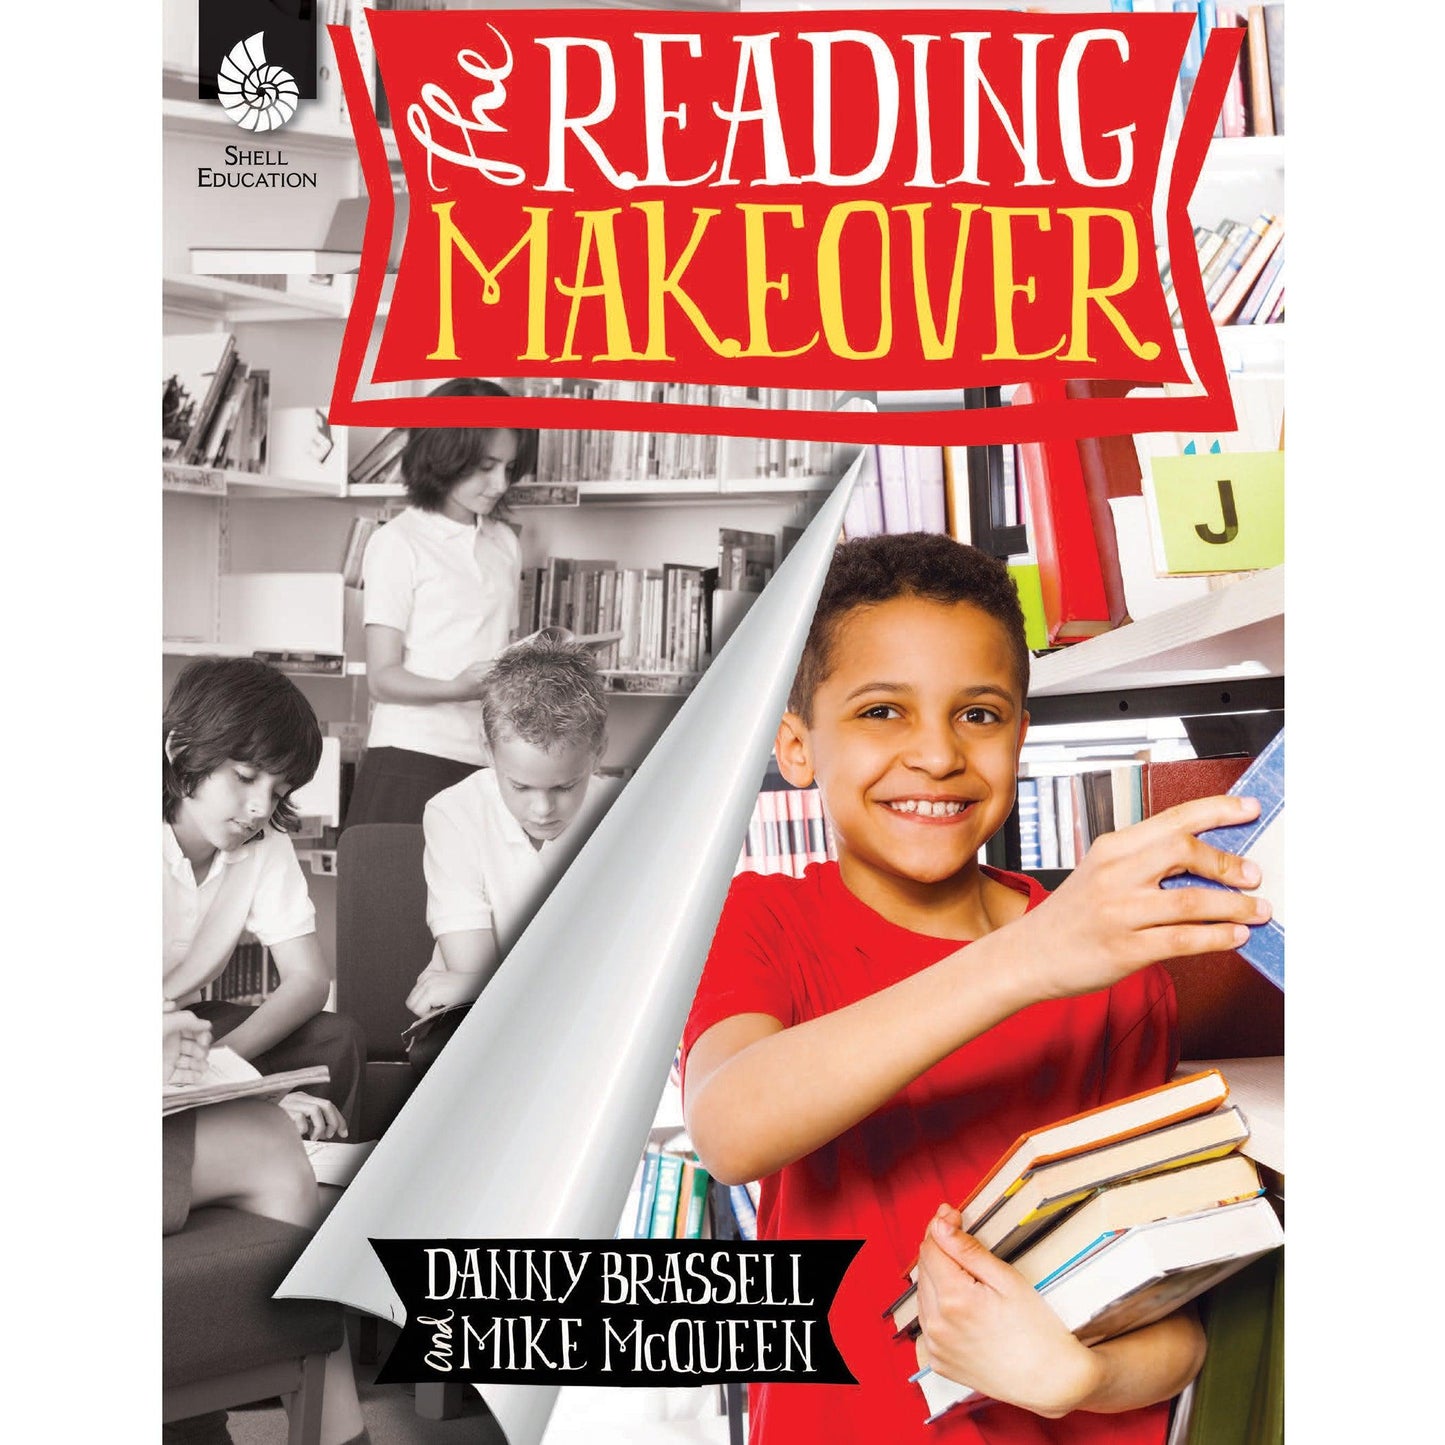 The Reading Makeover - Loomini